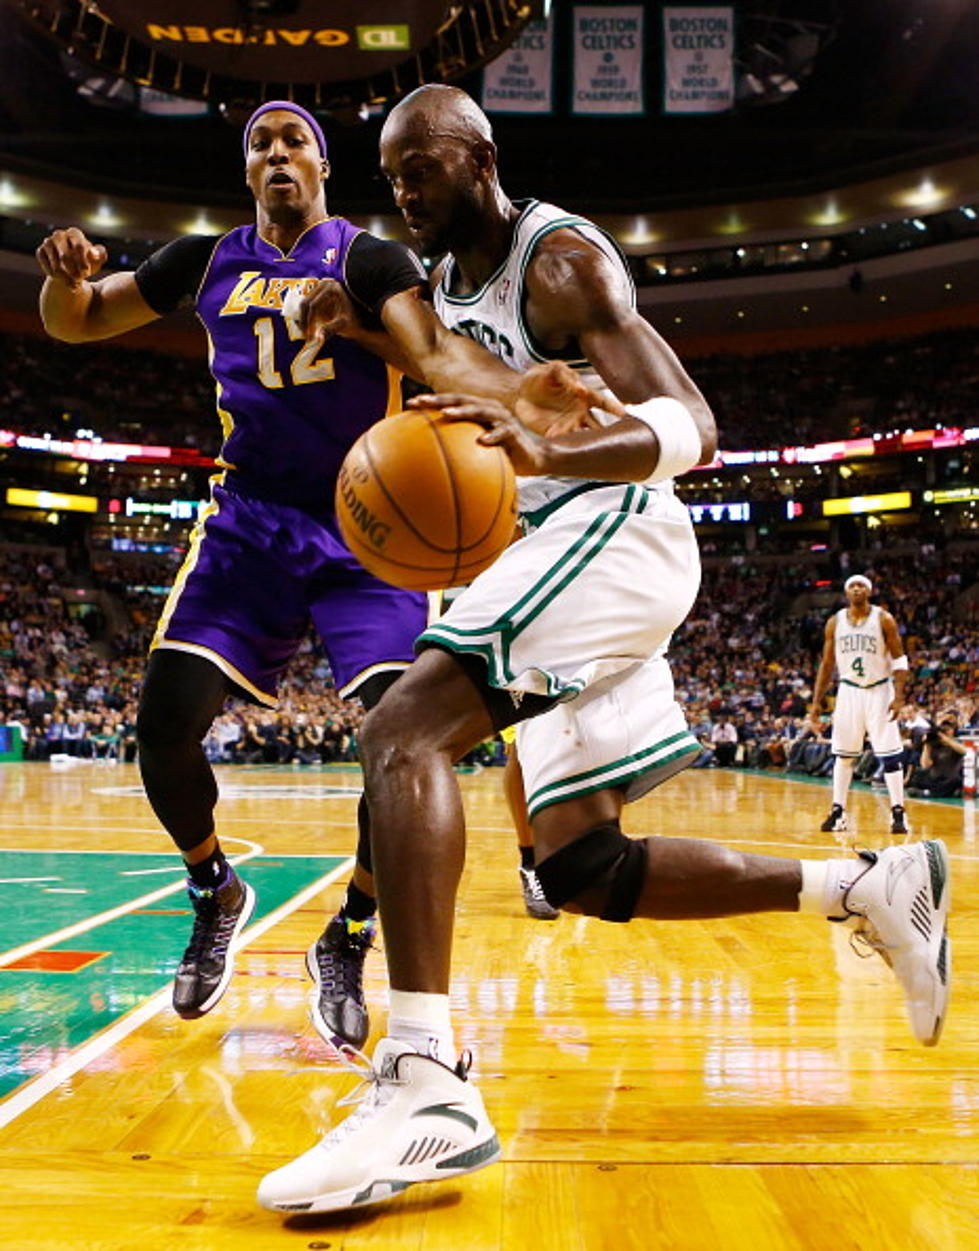 The Celtics Beat the Lakers &#8212; WBSM Friday Morning Sports [AUDIO]